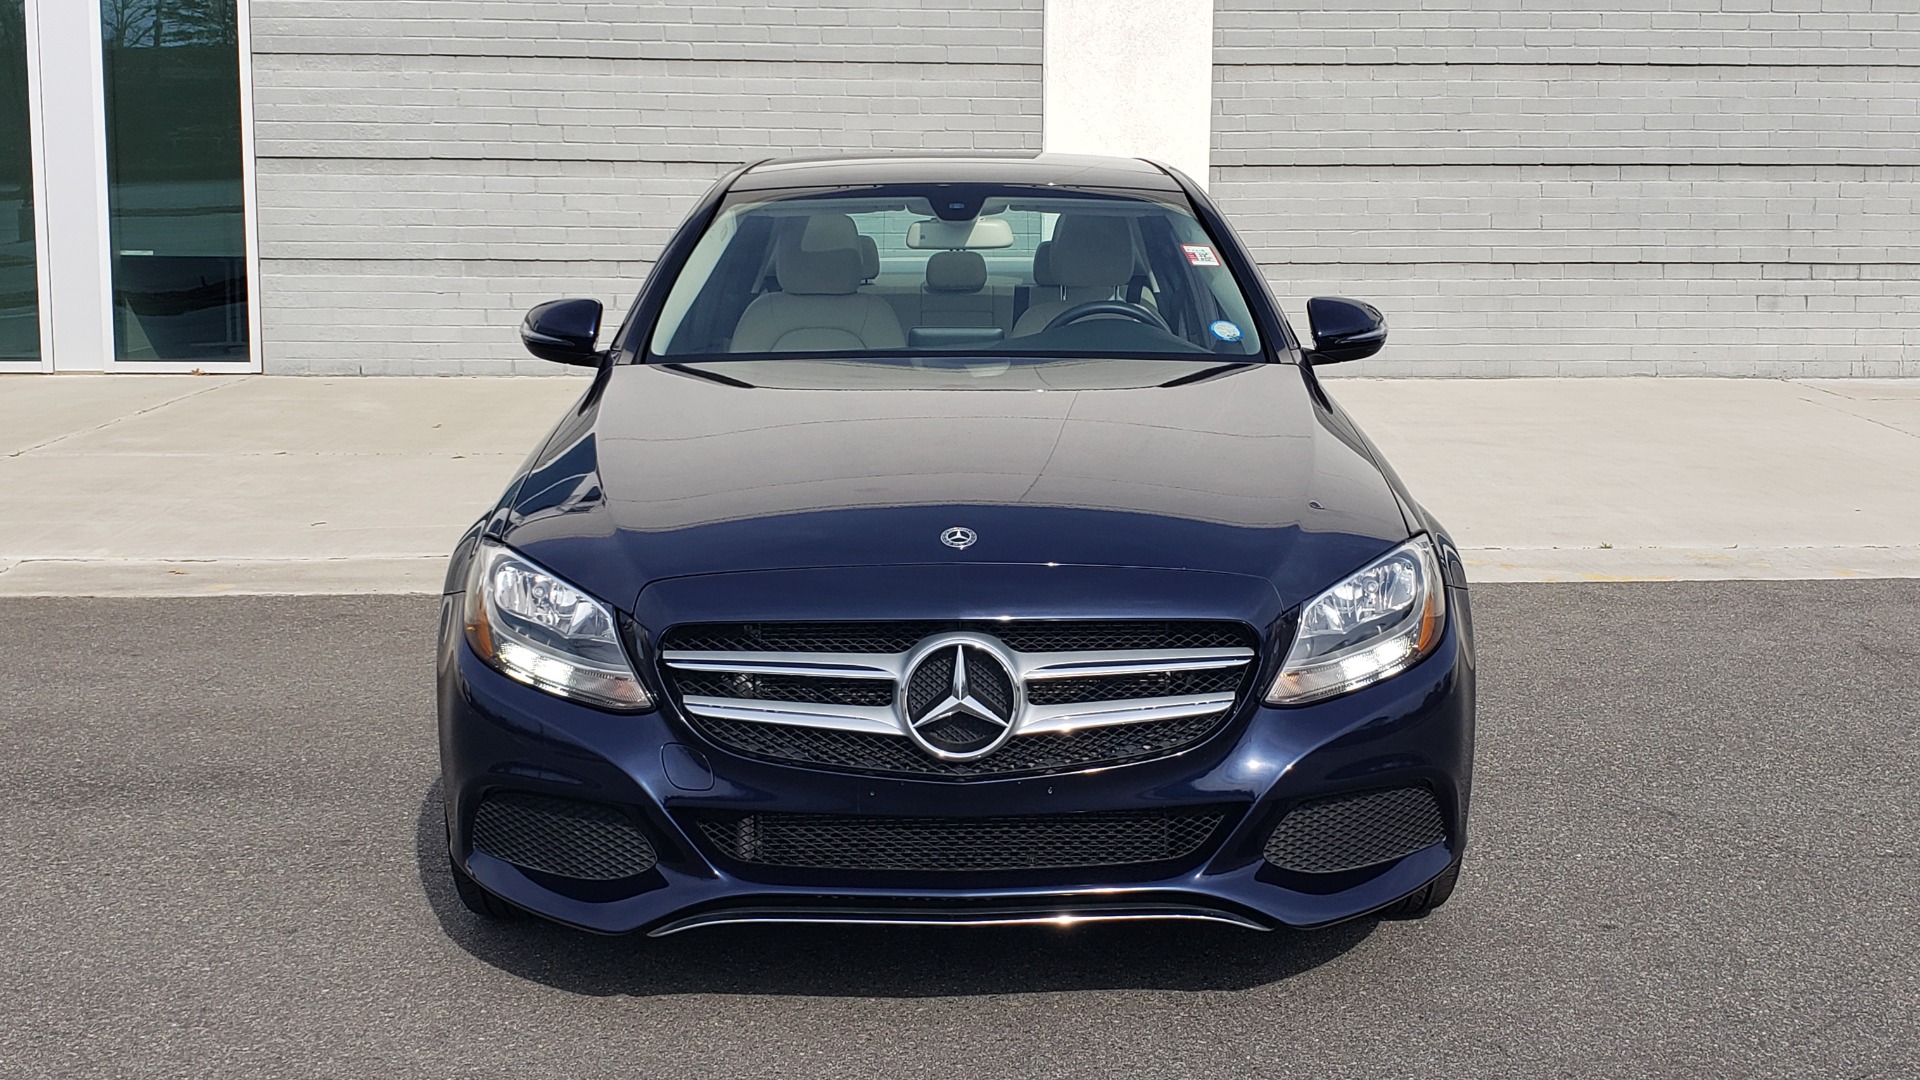 Used 2018 Mercedes-Benz C-CLASS C 300 PREMIUM / PANO-ROOF / HTD STST / APPL CARPLAY / REARVIEW for sale Sold at Formula Imports in Charlotte NC 28227 18